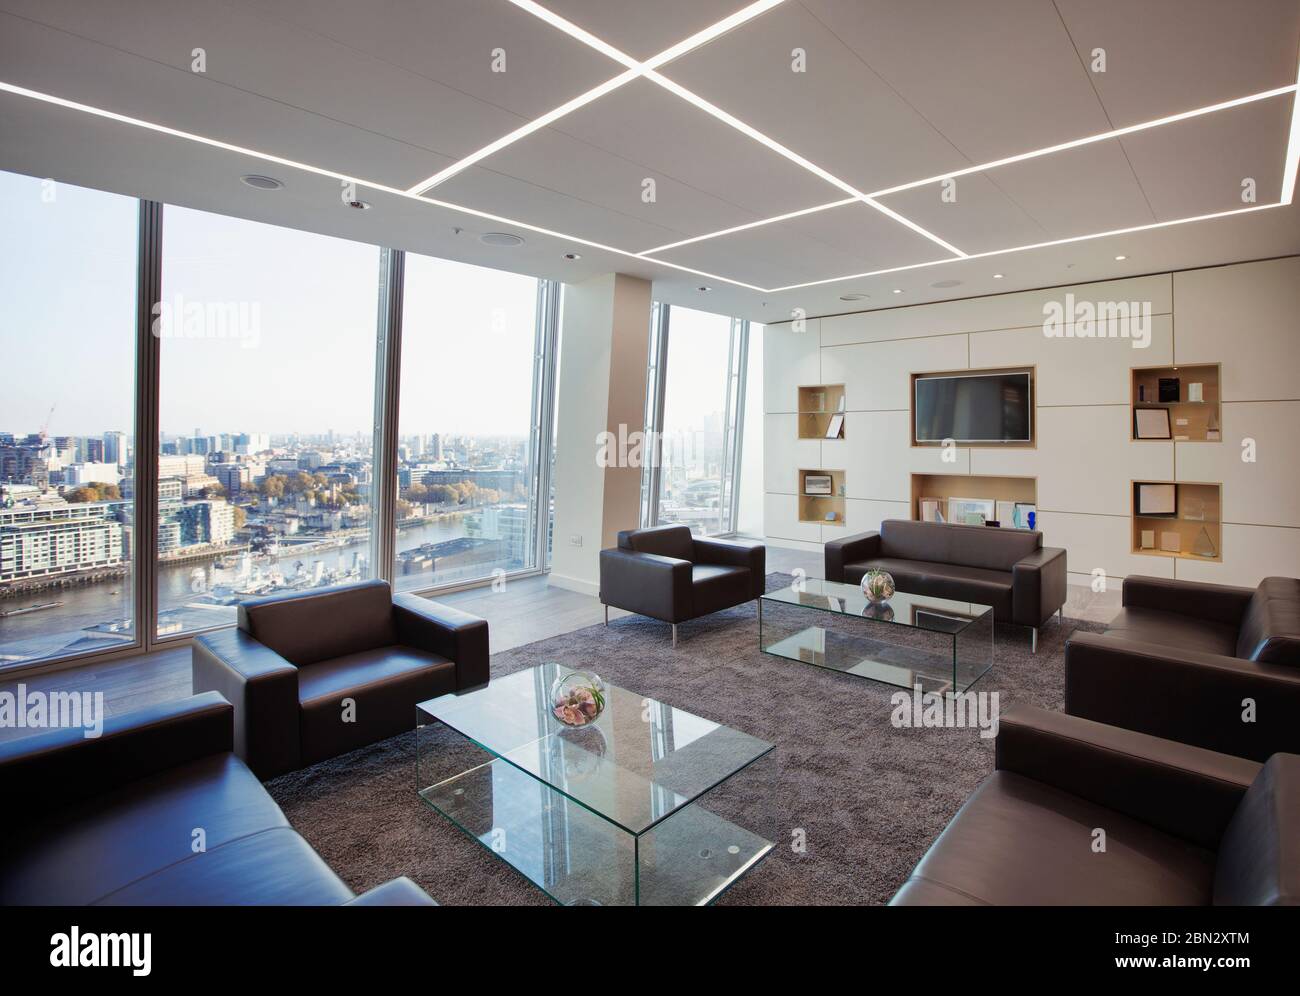 Modern highrise business office lobby overlooking city Stock Photo